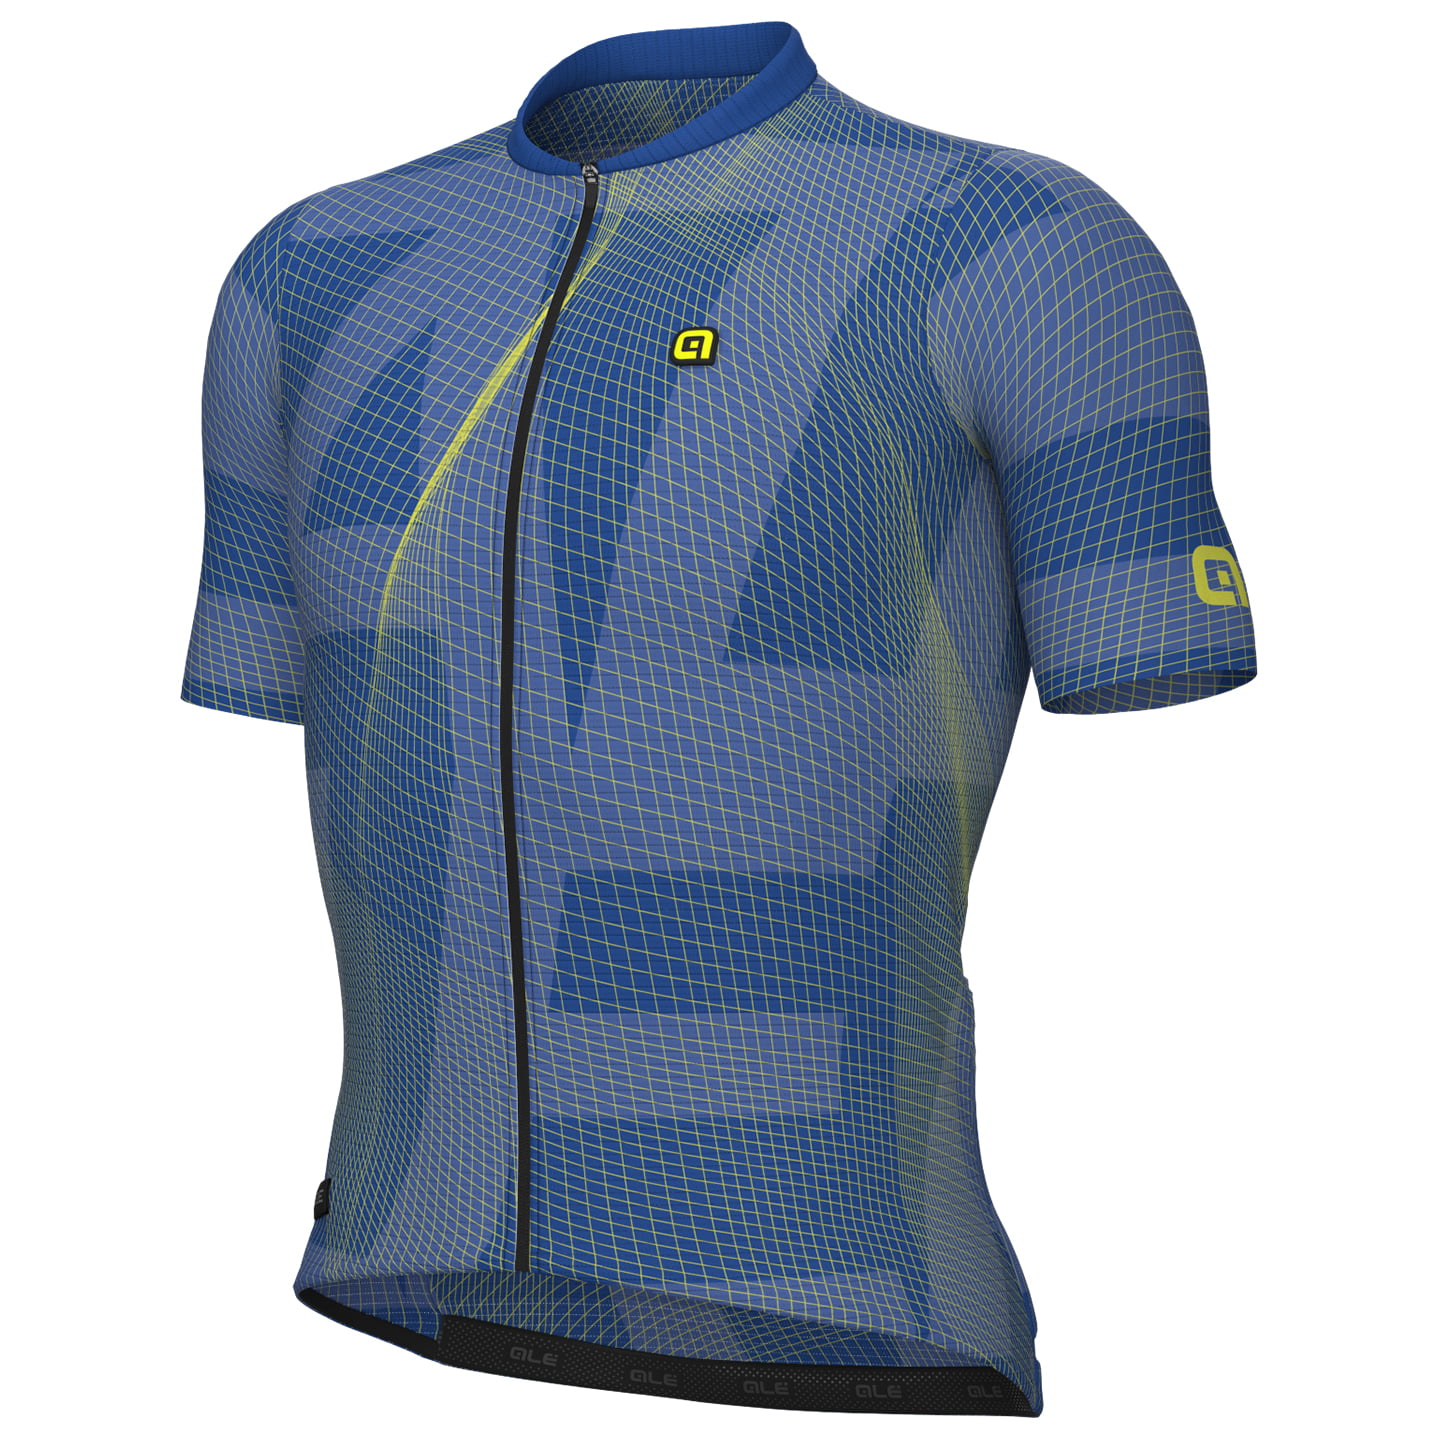 ALE Synergy Short Sleeve Jersey, for men, size M, Cycling jersey, Cycling clothing